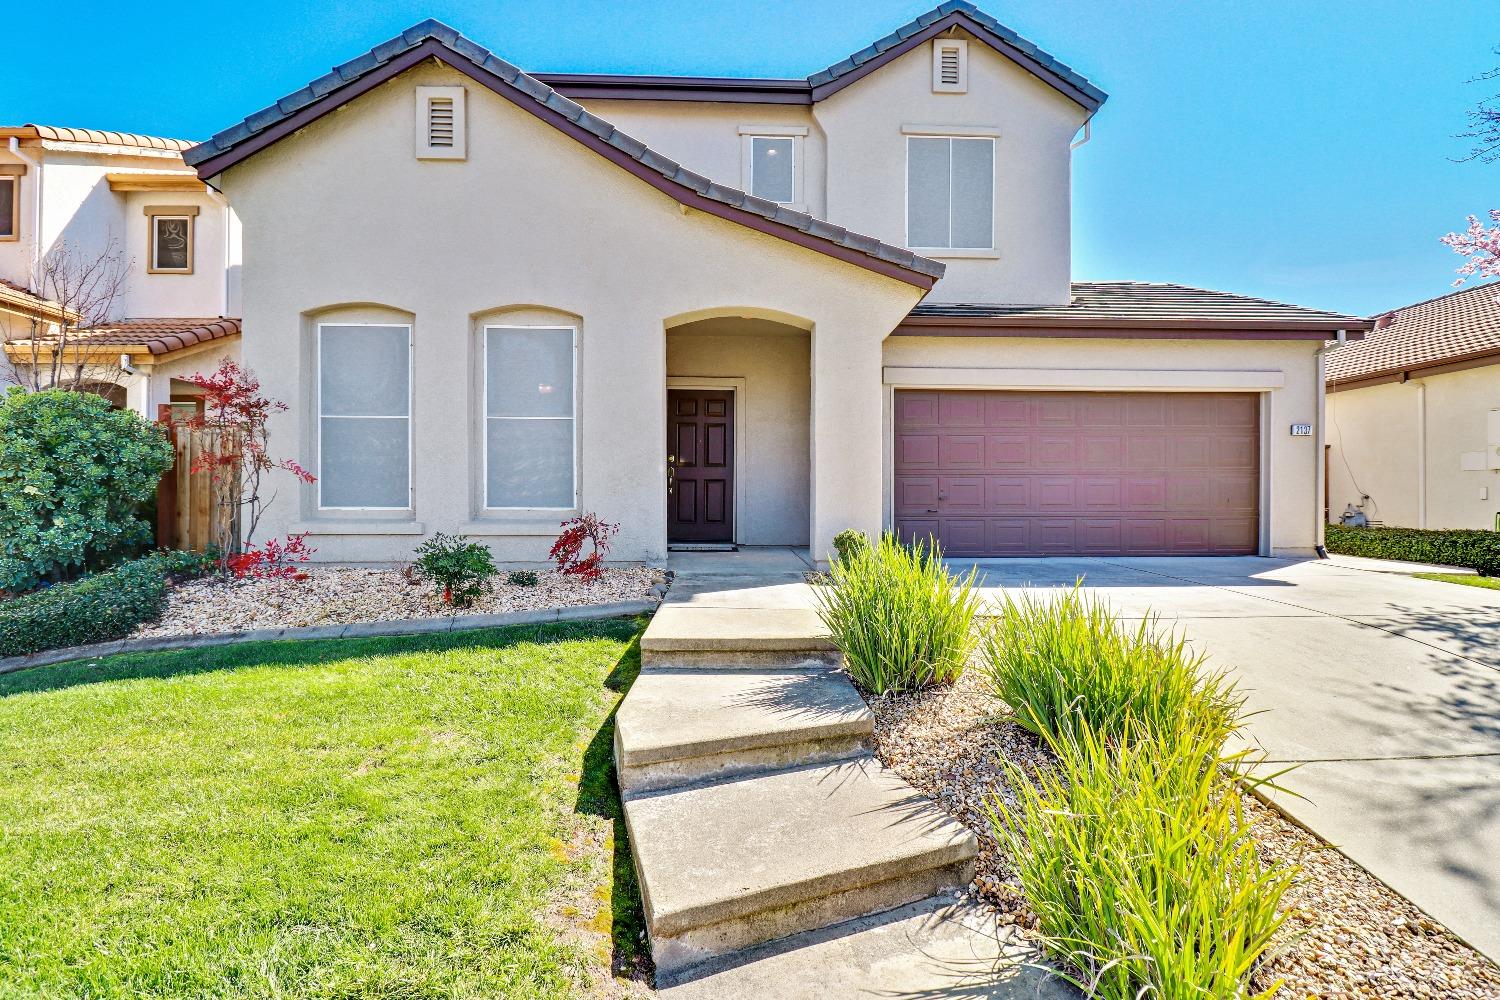 Photo of 2137 Collet Quarry Dr in Rocklin, CA